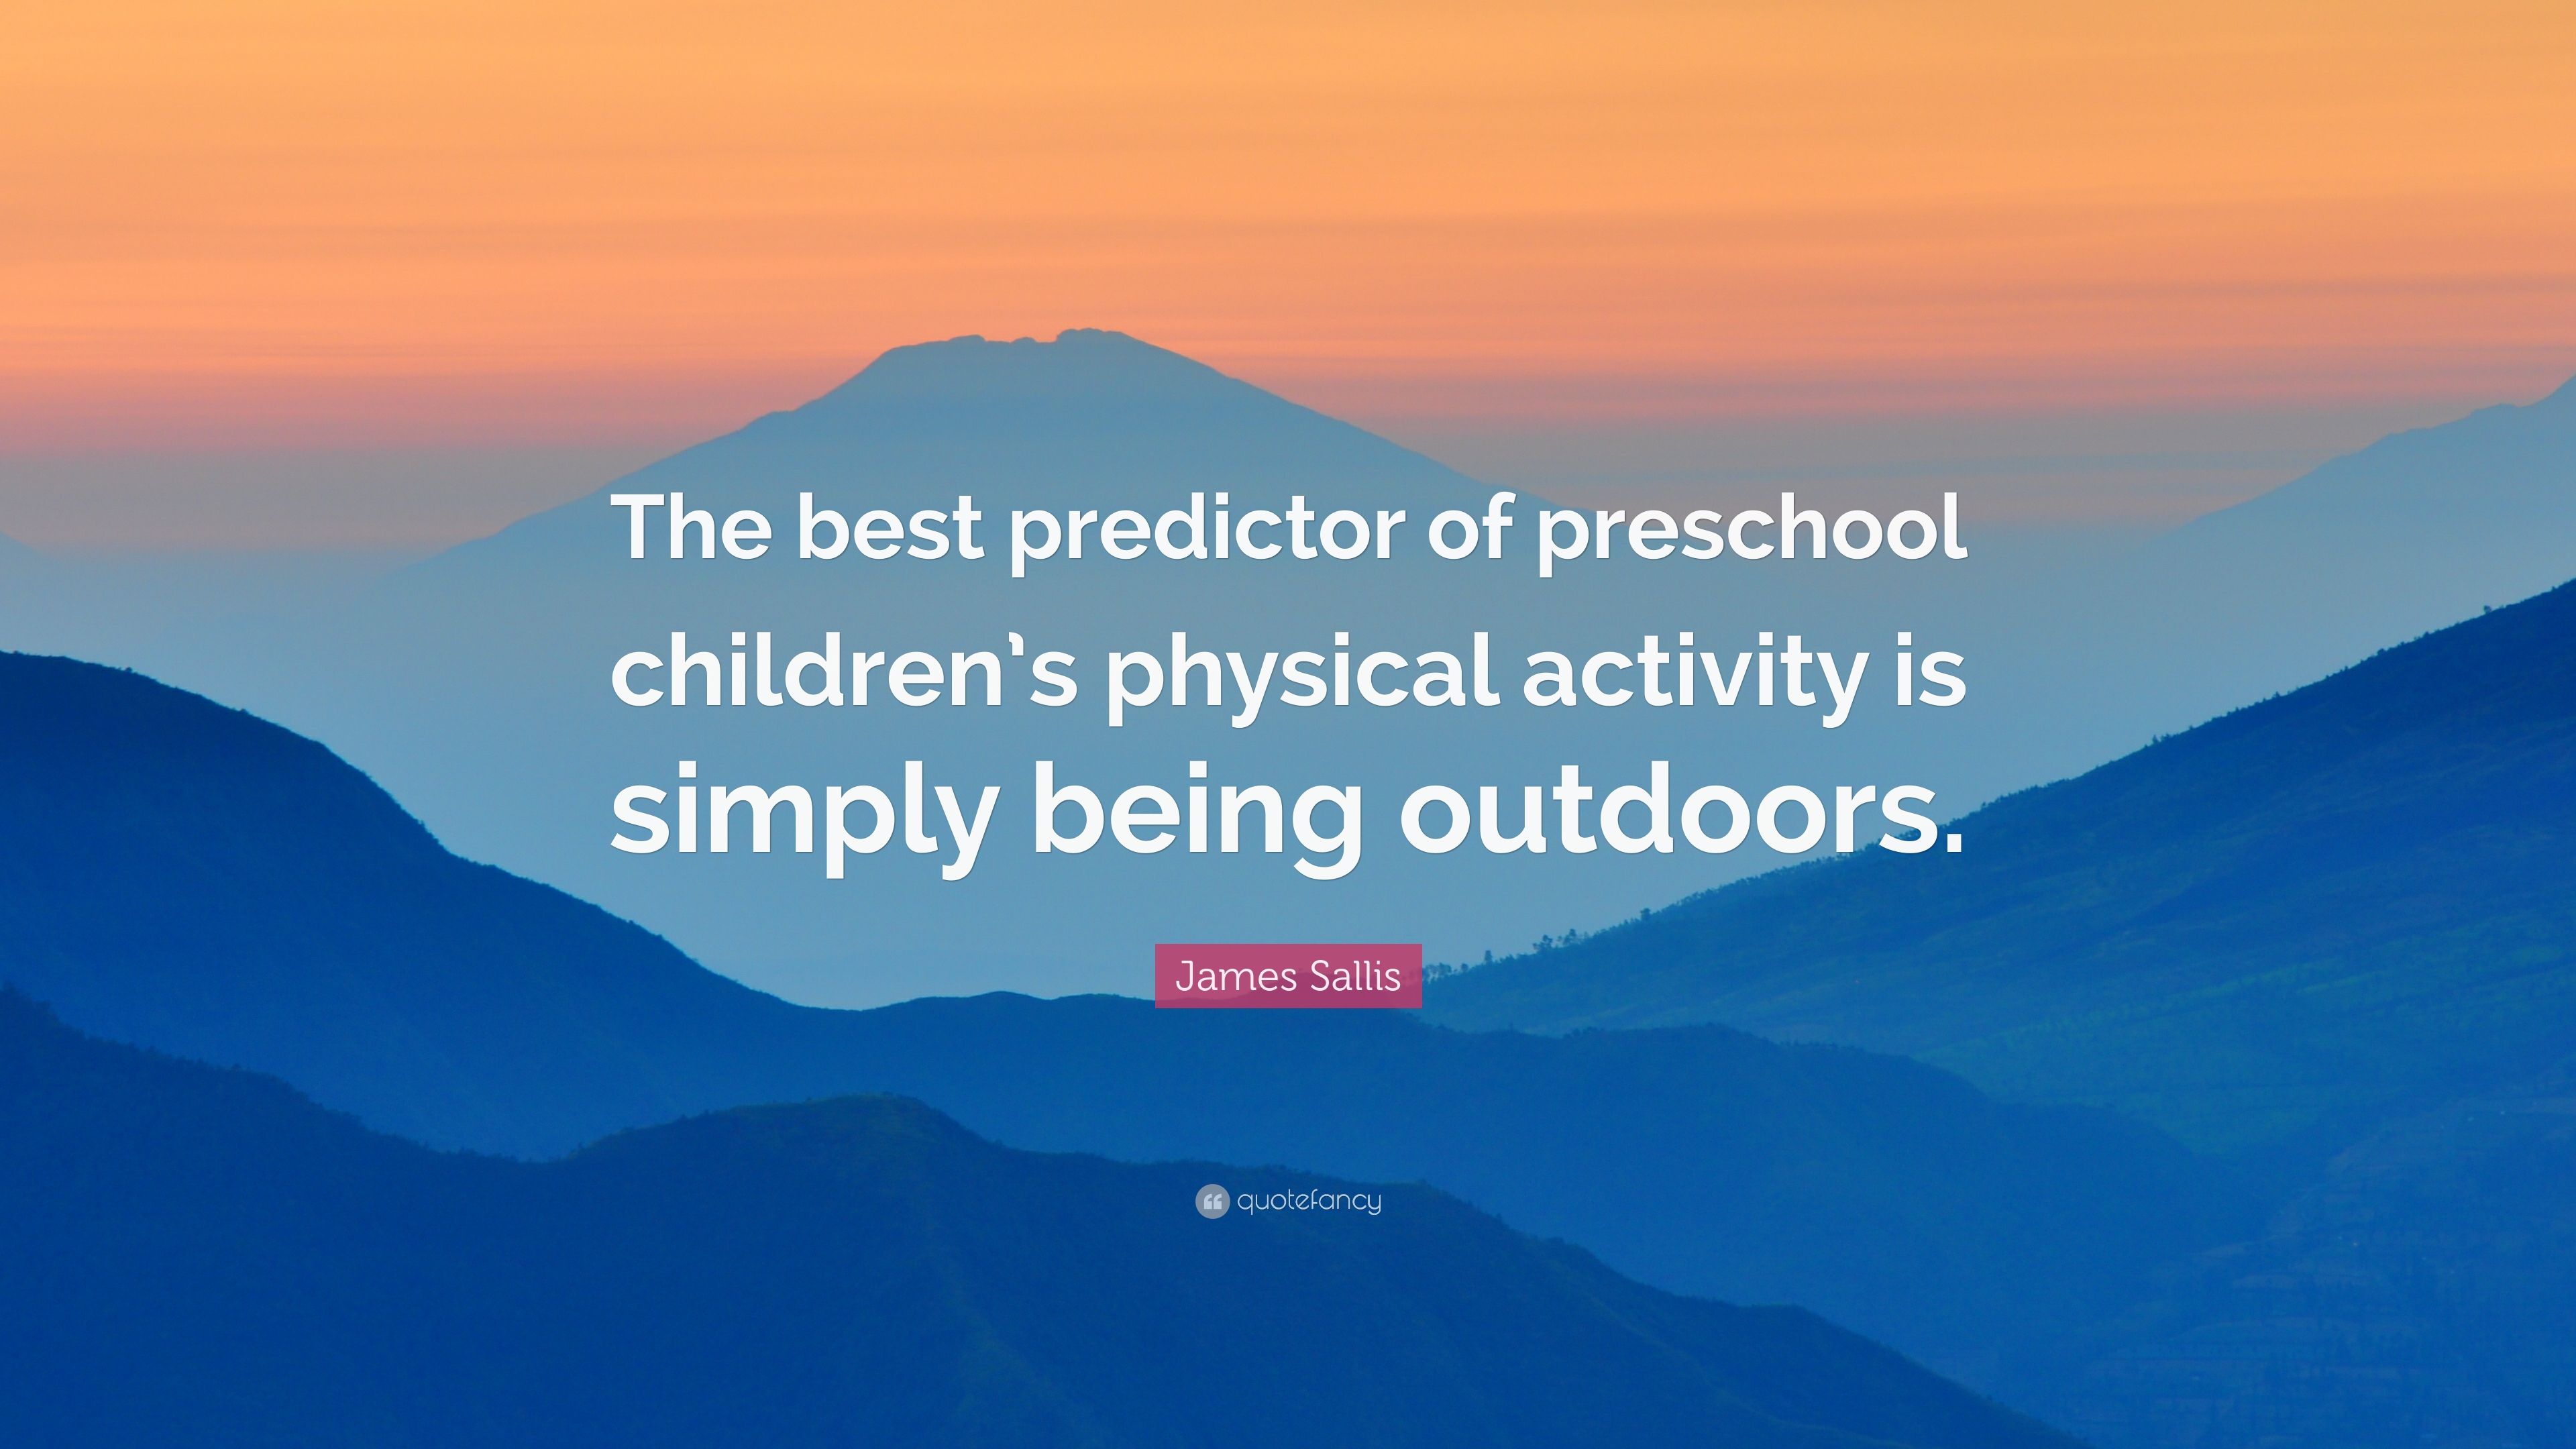 James Sallis Quote: “The best predictor of preschool children's physical activity is simply being outdoors.” (7 wallpaper)